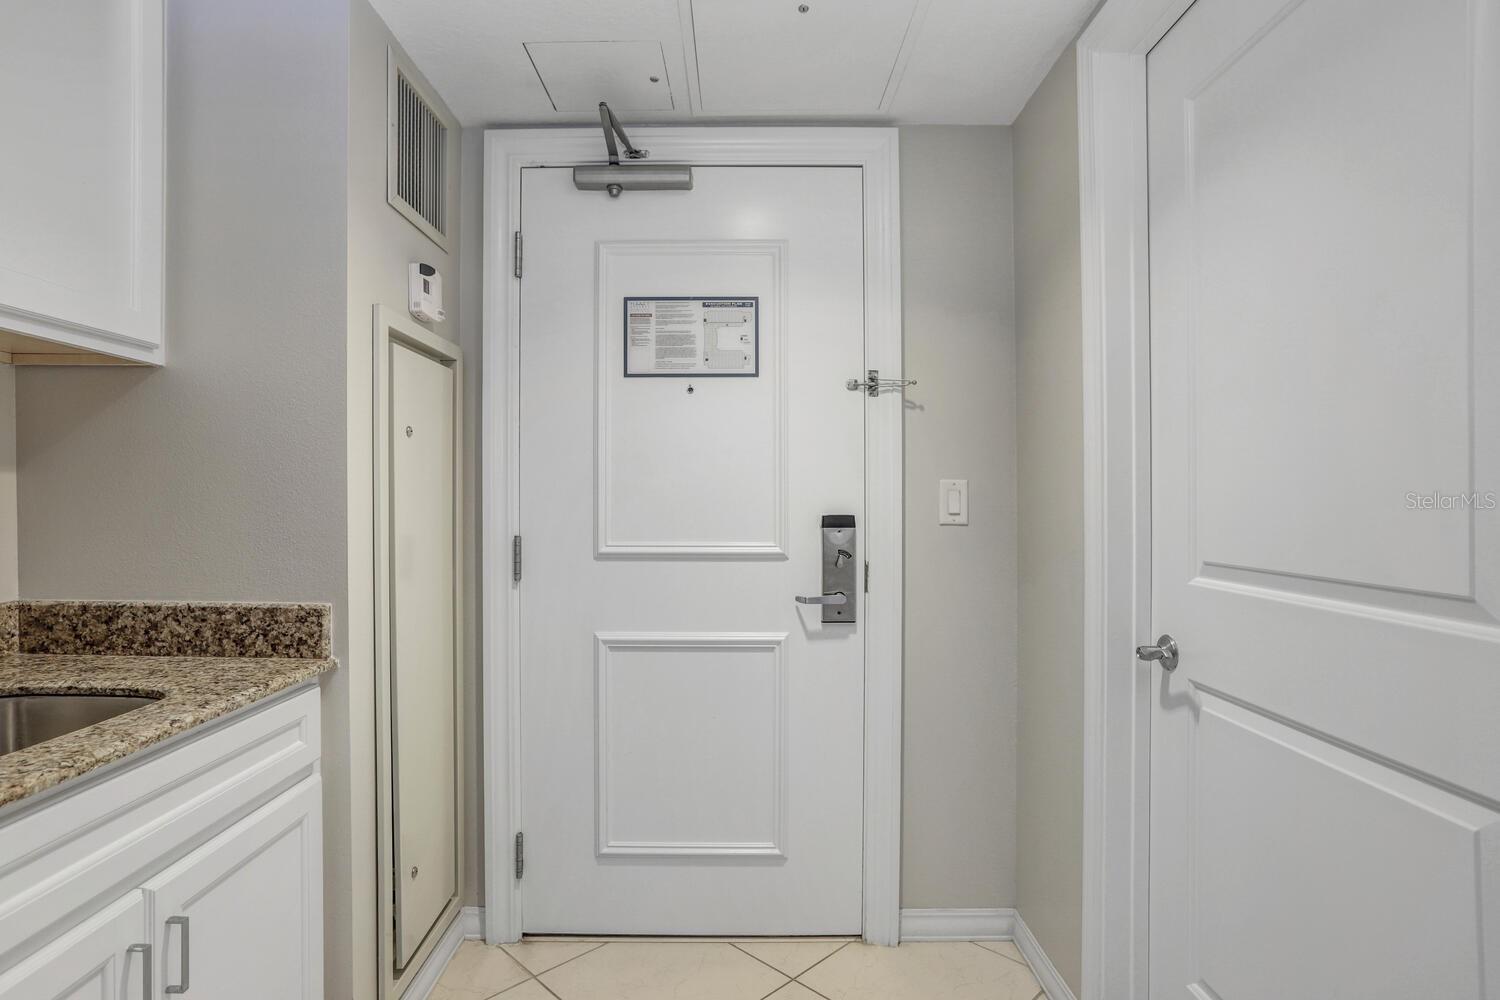 The cabana entrance is conveniently situated directly across the hallway. This location offers easy access and a straightforward route for guests.